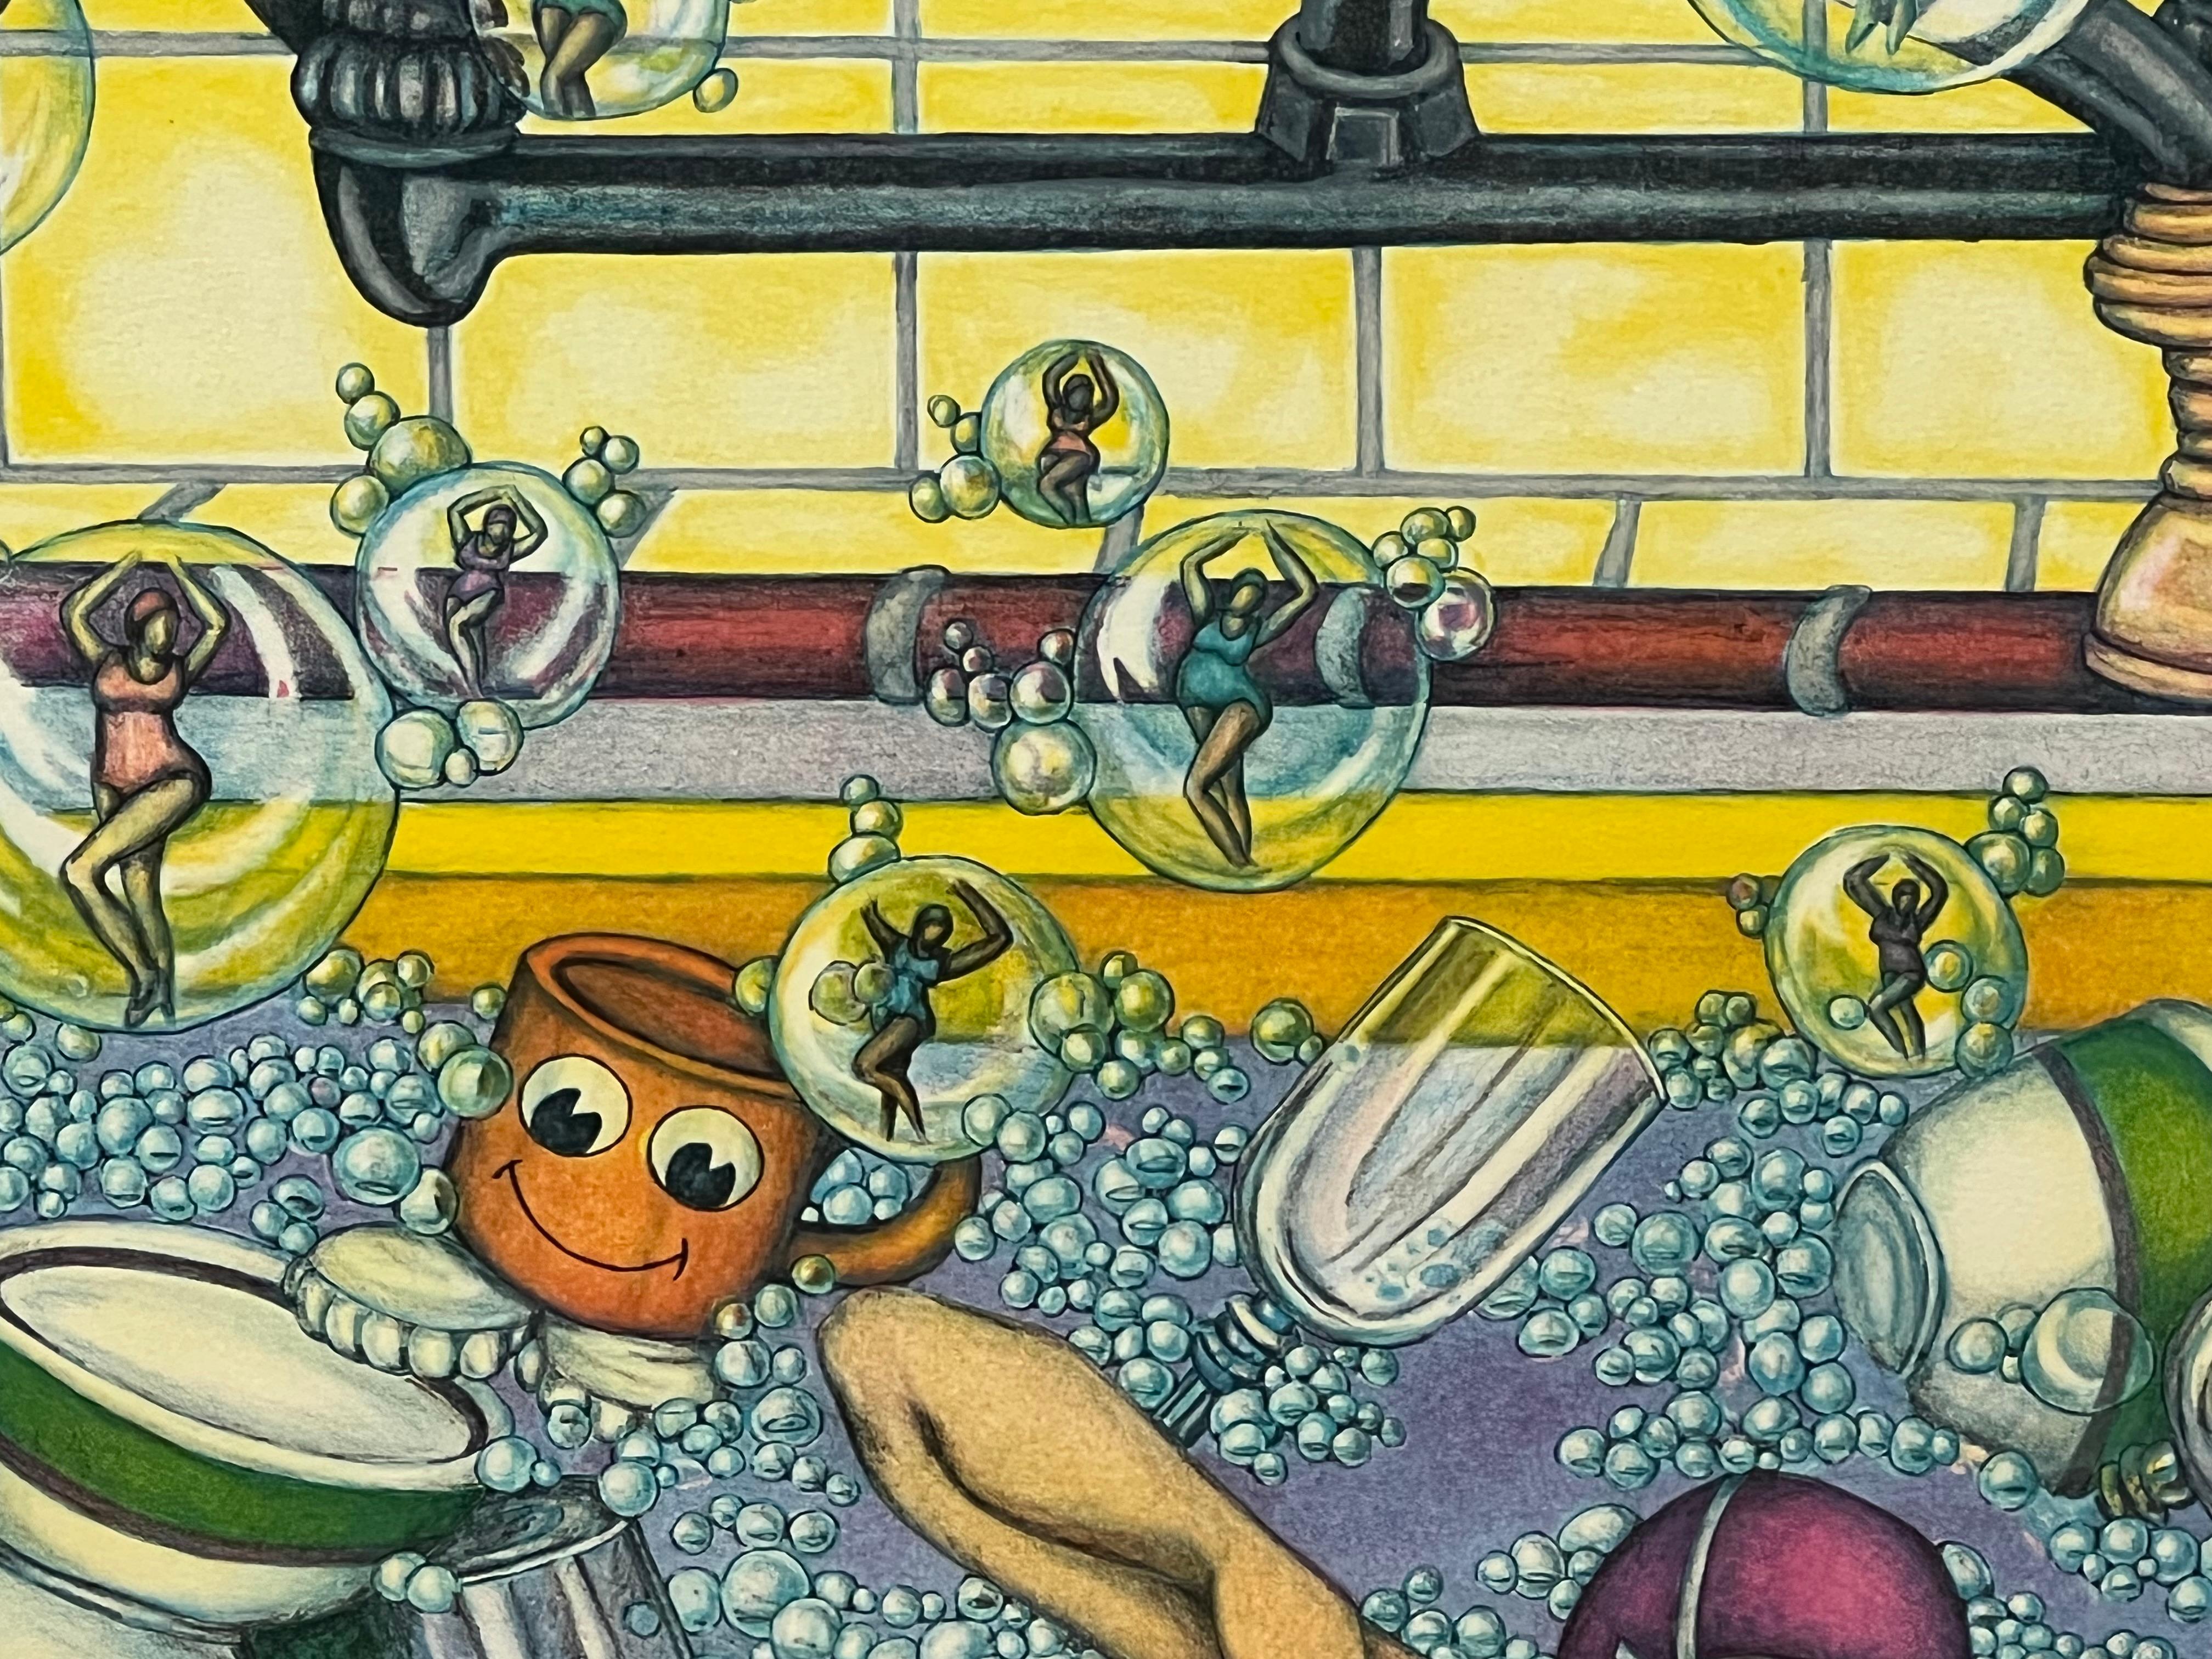 The piece is eligibly signed, numbered, and dated 1988. 
This whimsical 1988 lithograph captures a surreal kitchen scene, filled with unexpected and lighthearted elements. 
A happy delirium in a sink full of dishes and soap bubbles with several